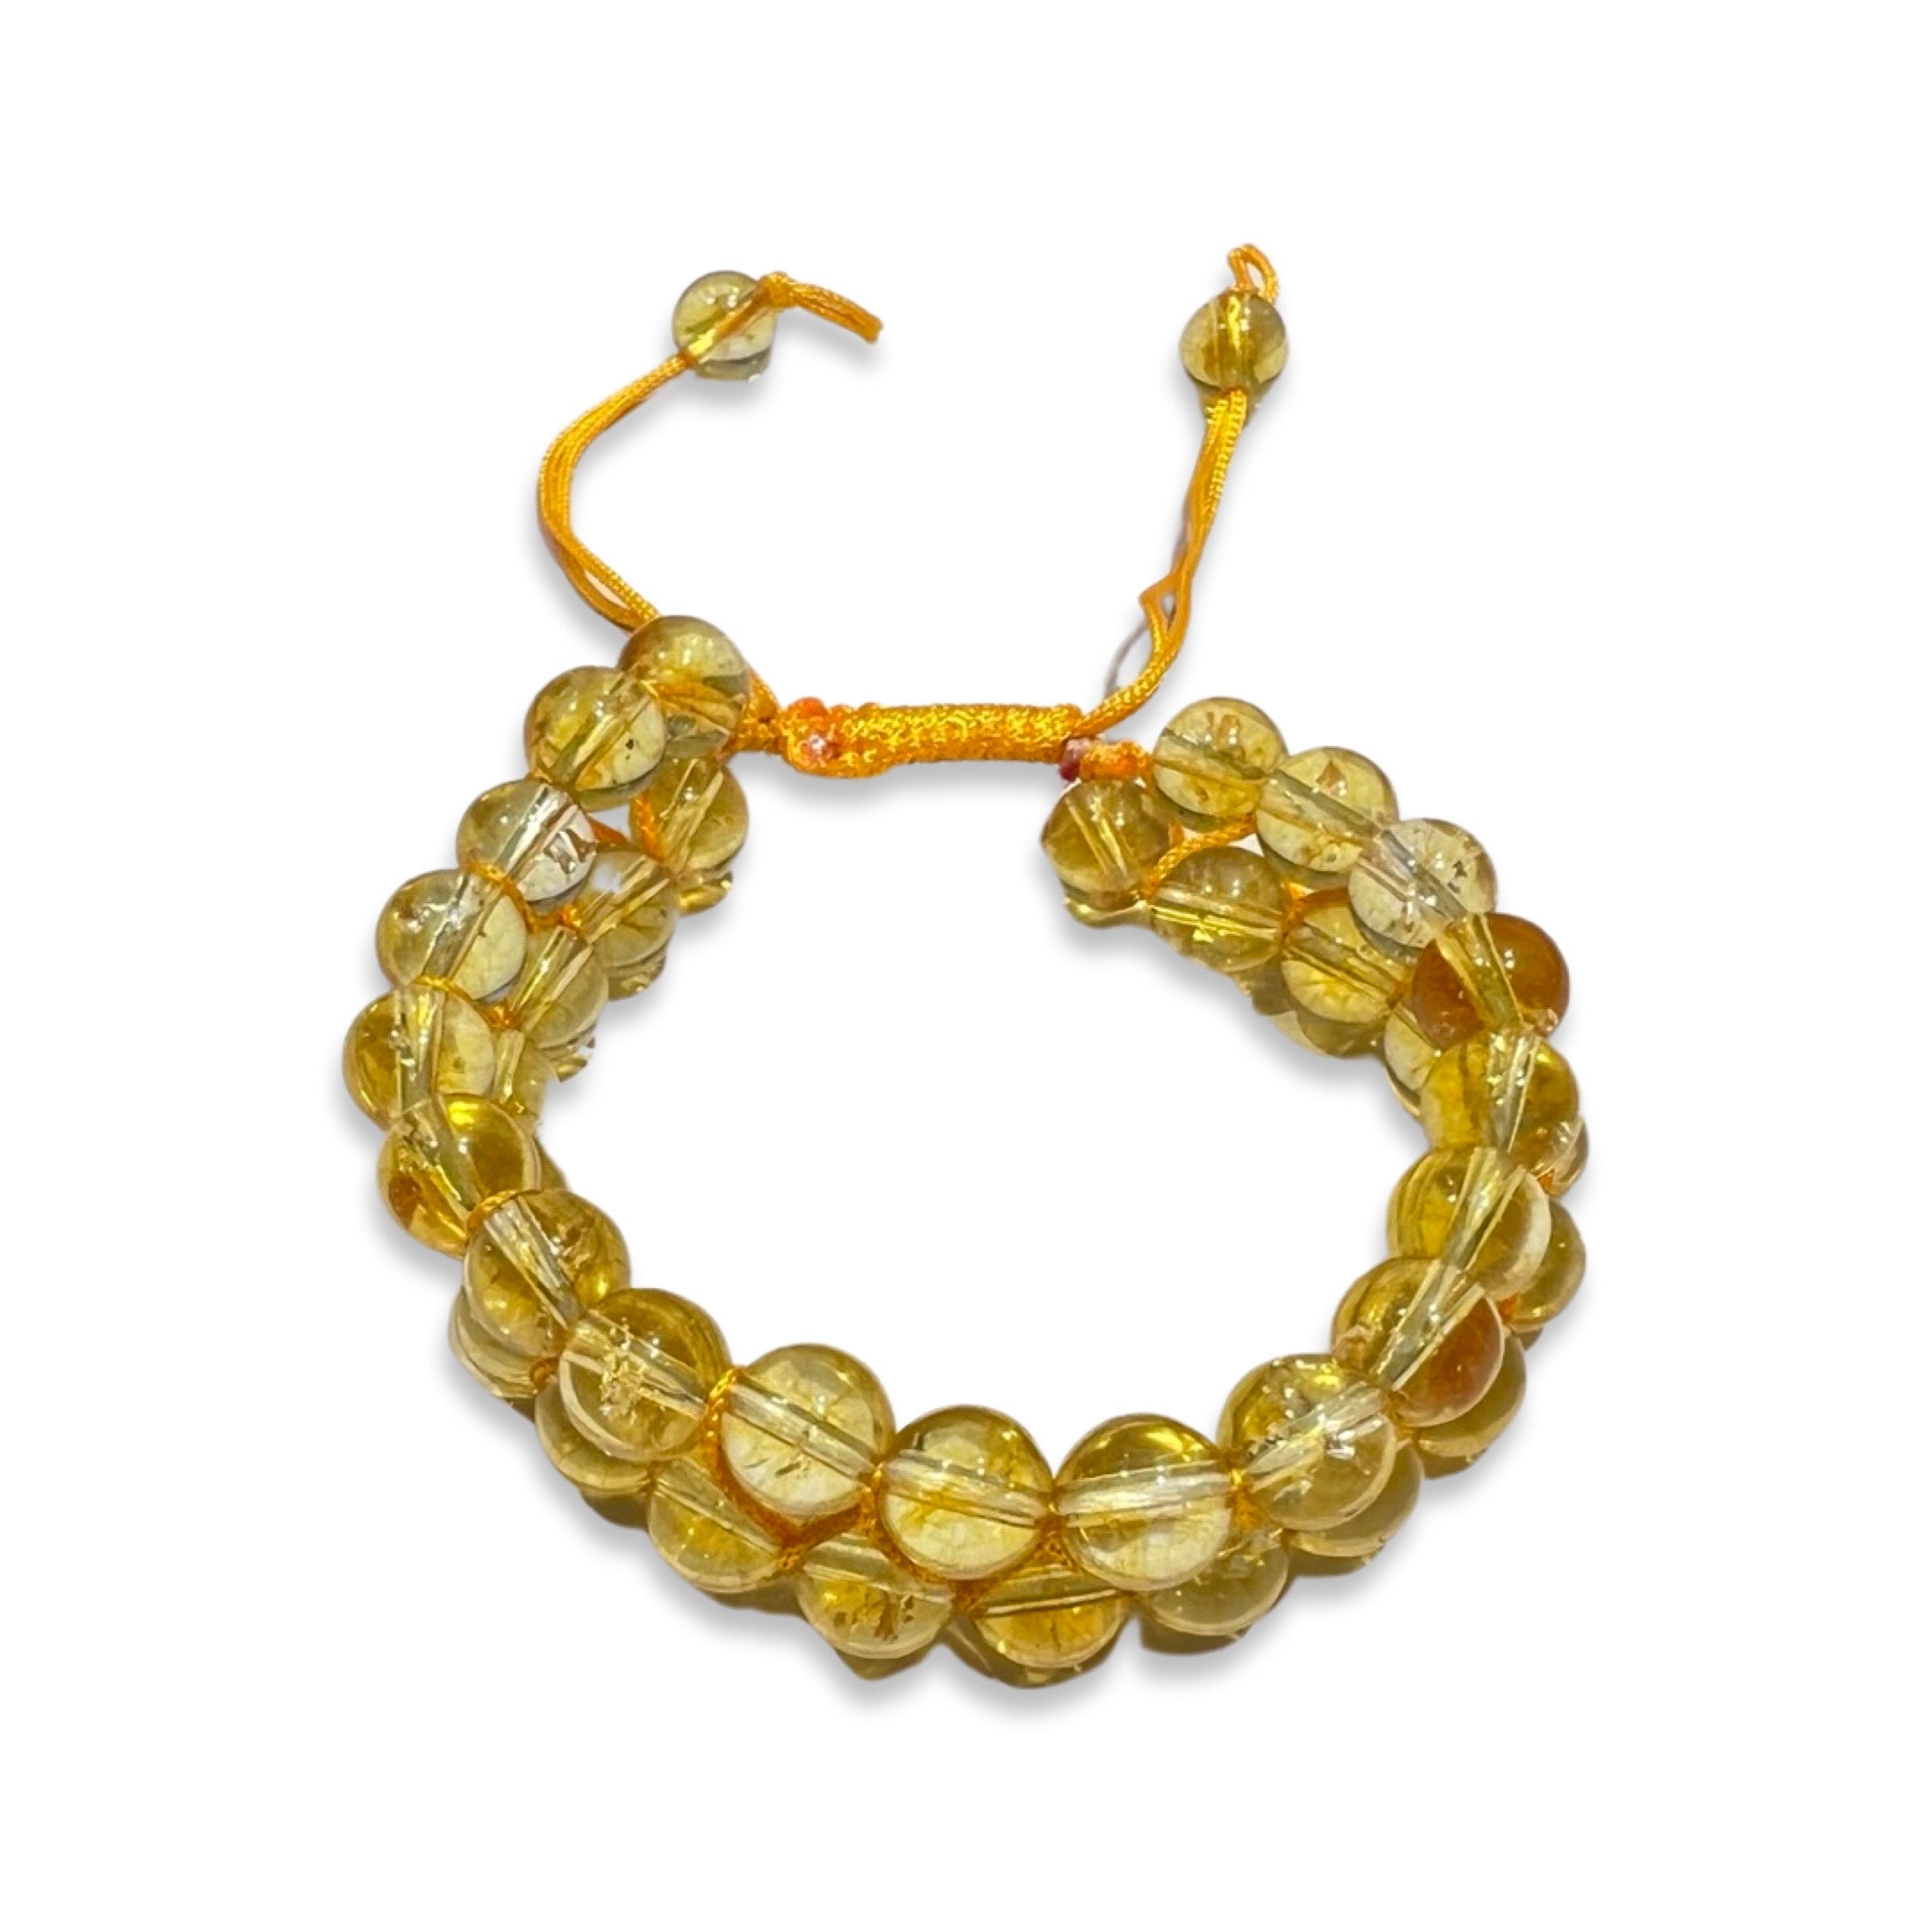 Buy SOLAVA Original Yellow Citrine Bracelet with Lab Certificate for Men  and Women - Natural Energised Bead Stone Crystal Bracelet for Money,  Success, and Good Luck - 8MM Beads at Amazon.in